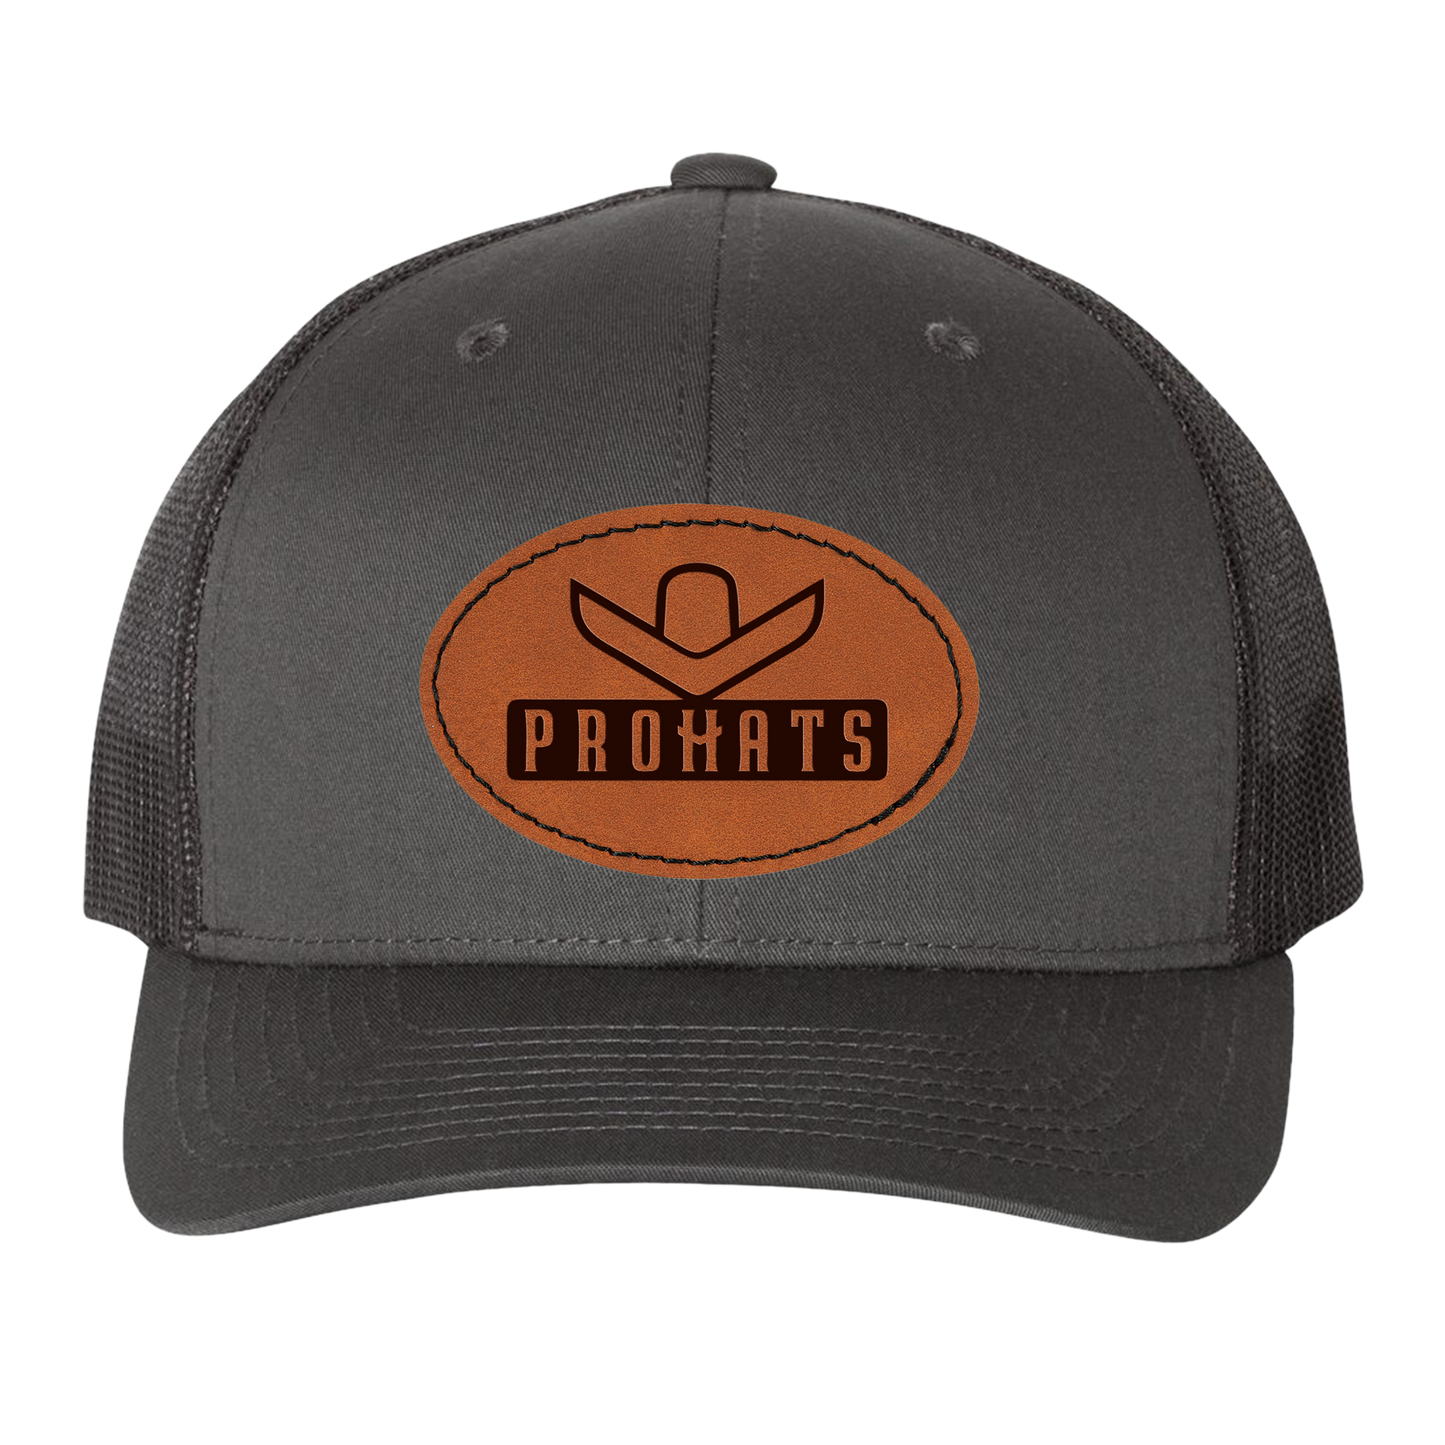 PROHATS Leather Patch Cap